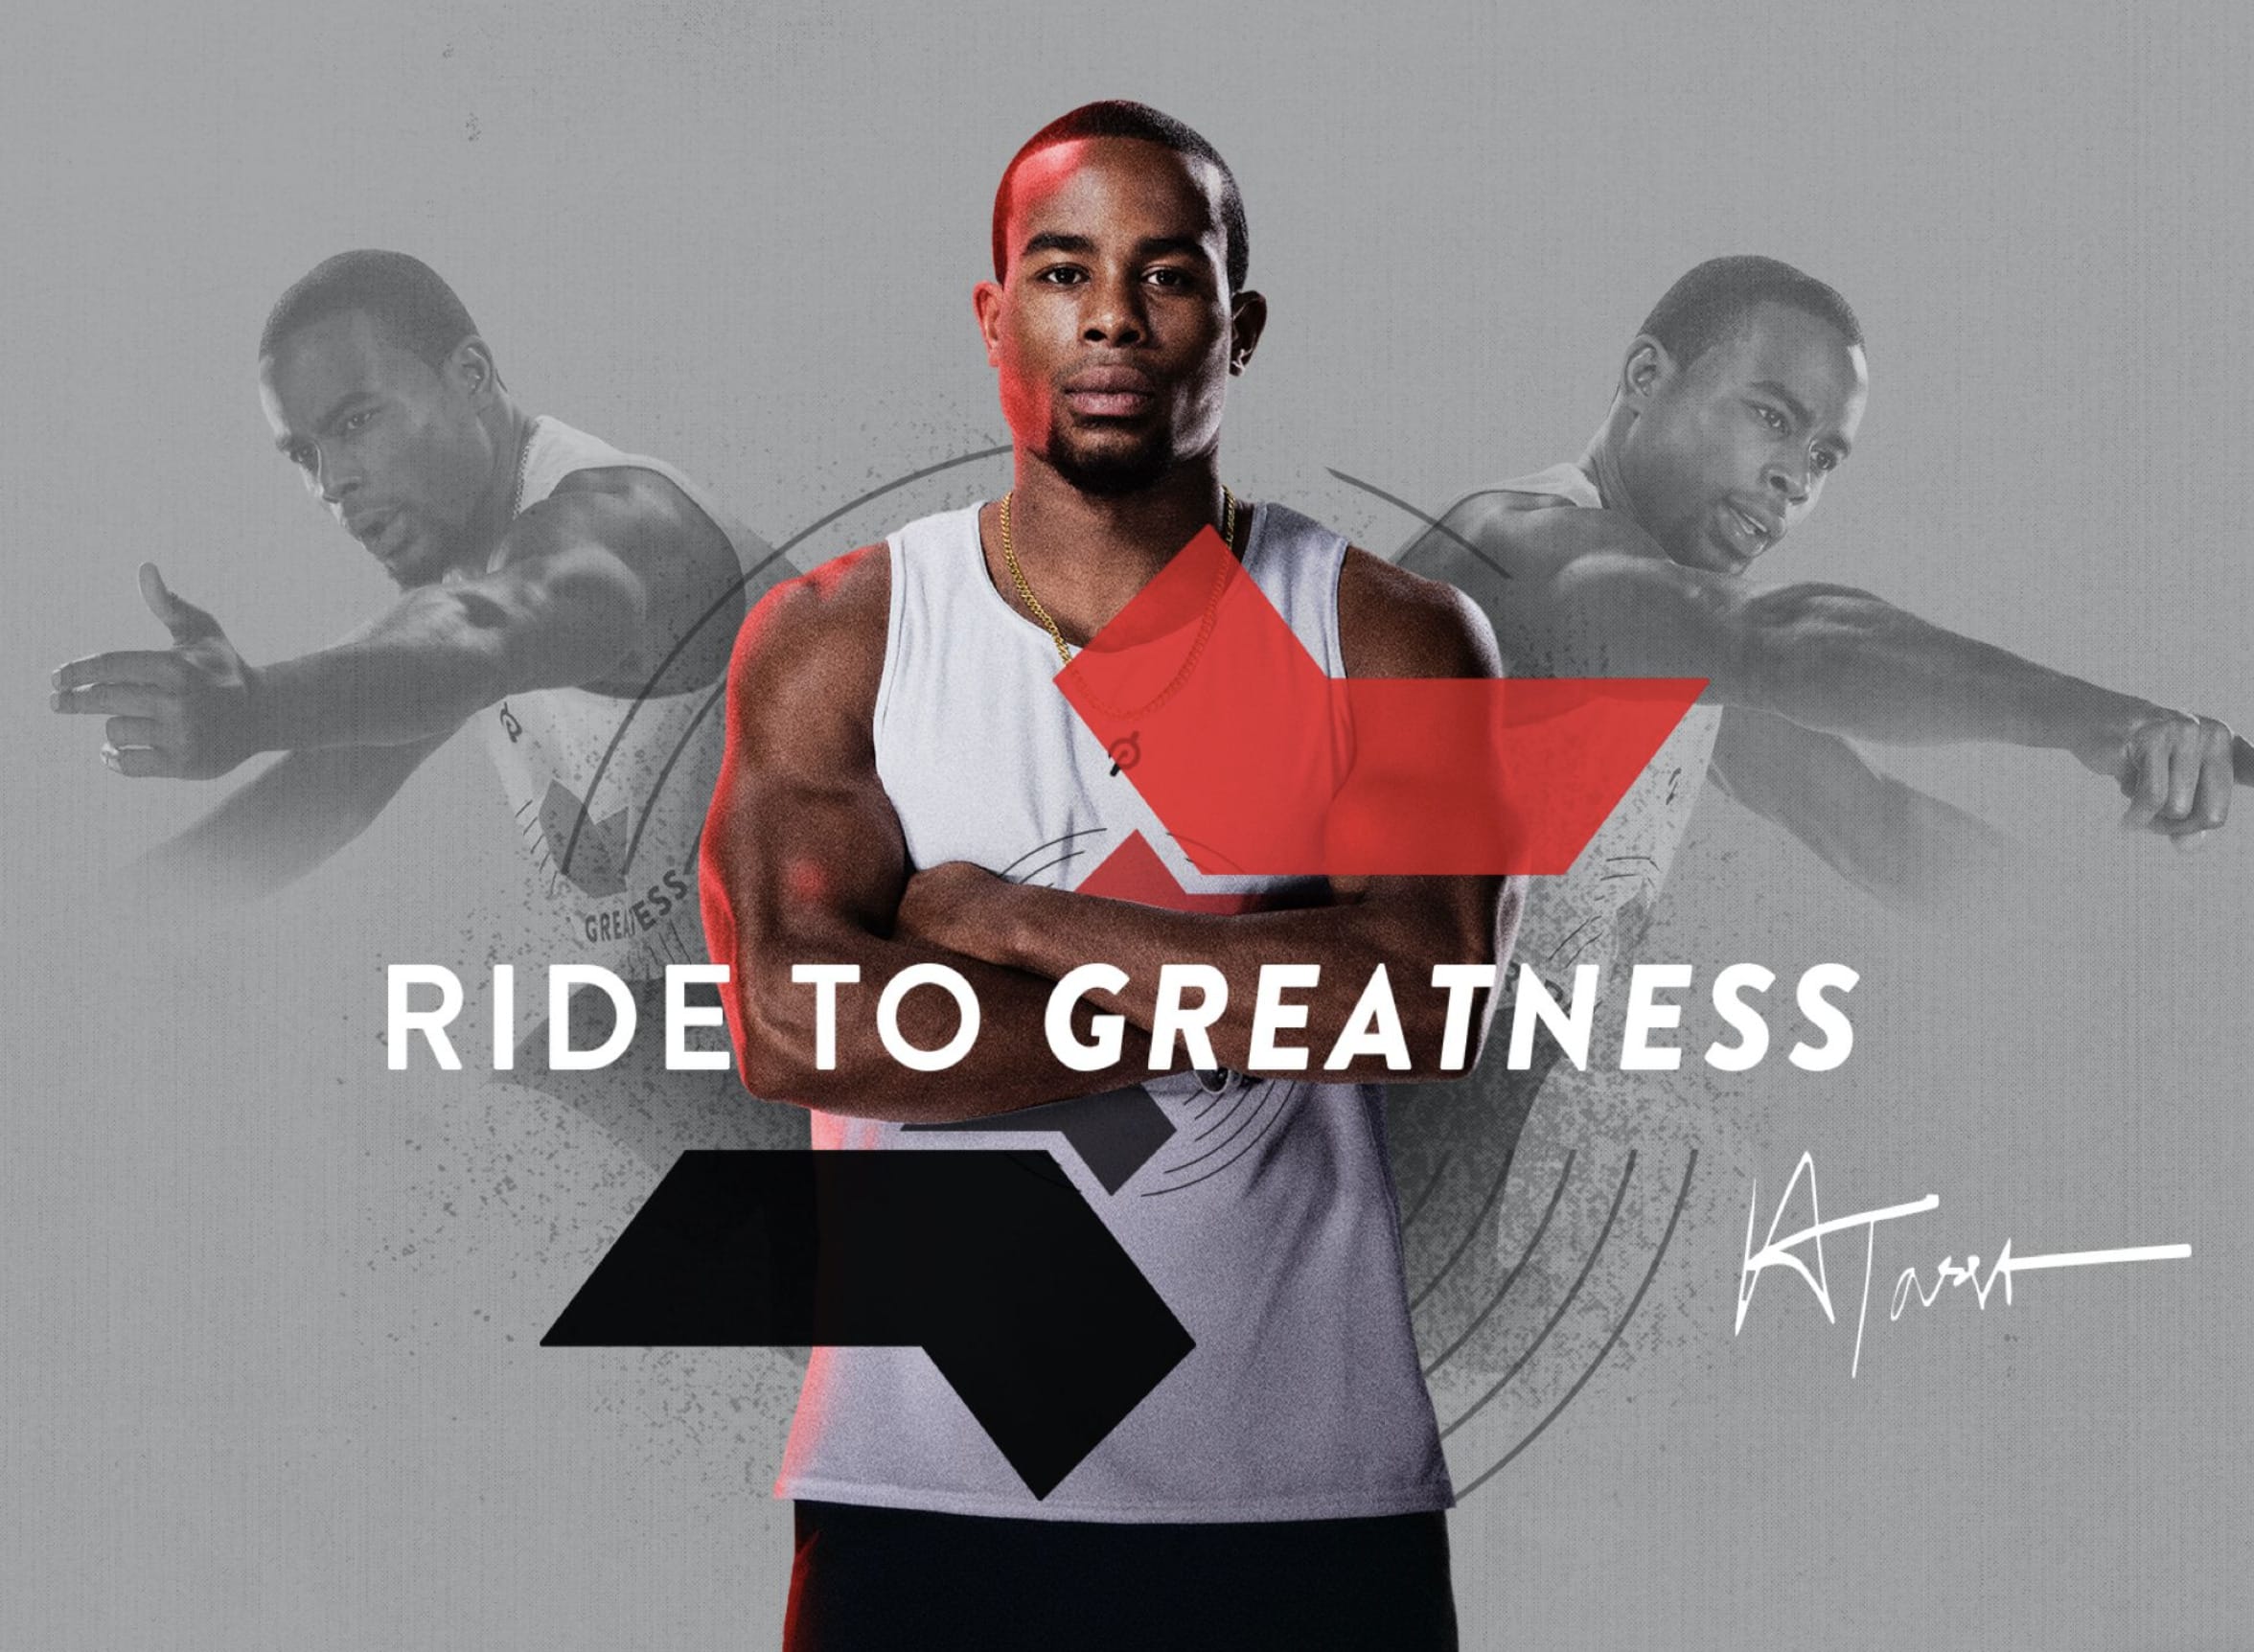 Peloton has announced the "Ride to Greatness" competition with Alex Toussaint